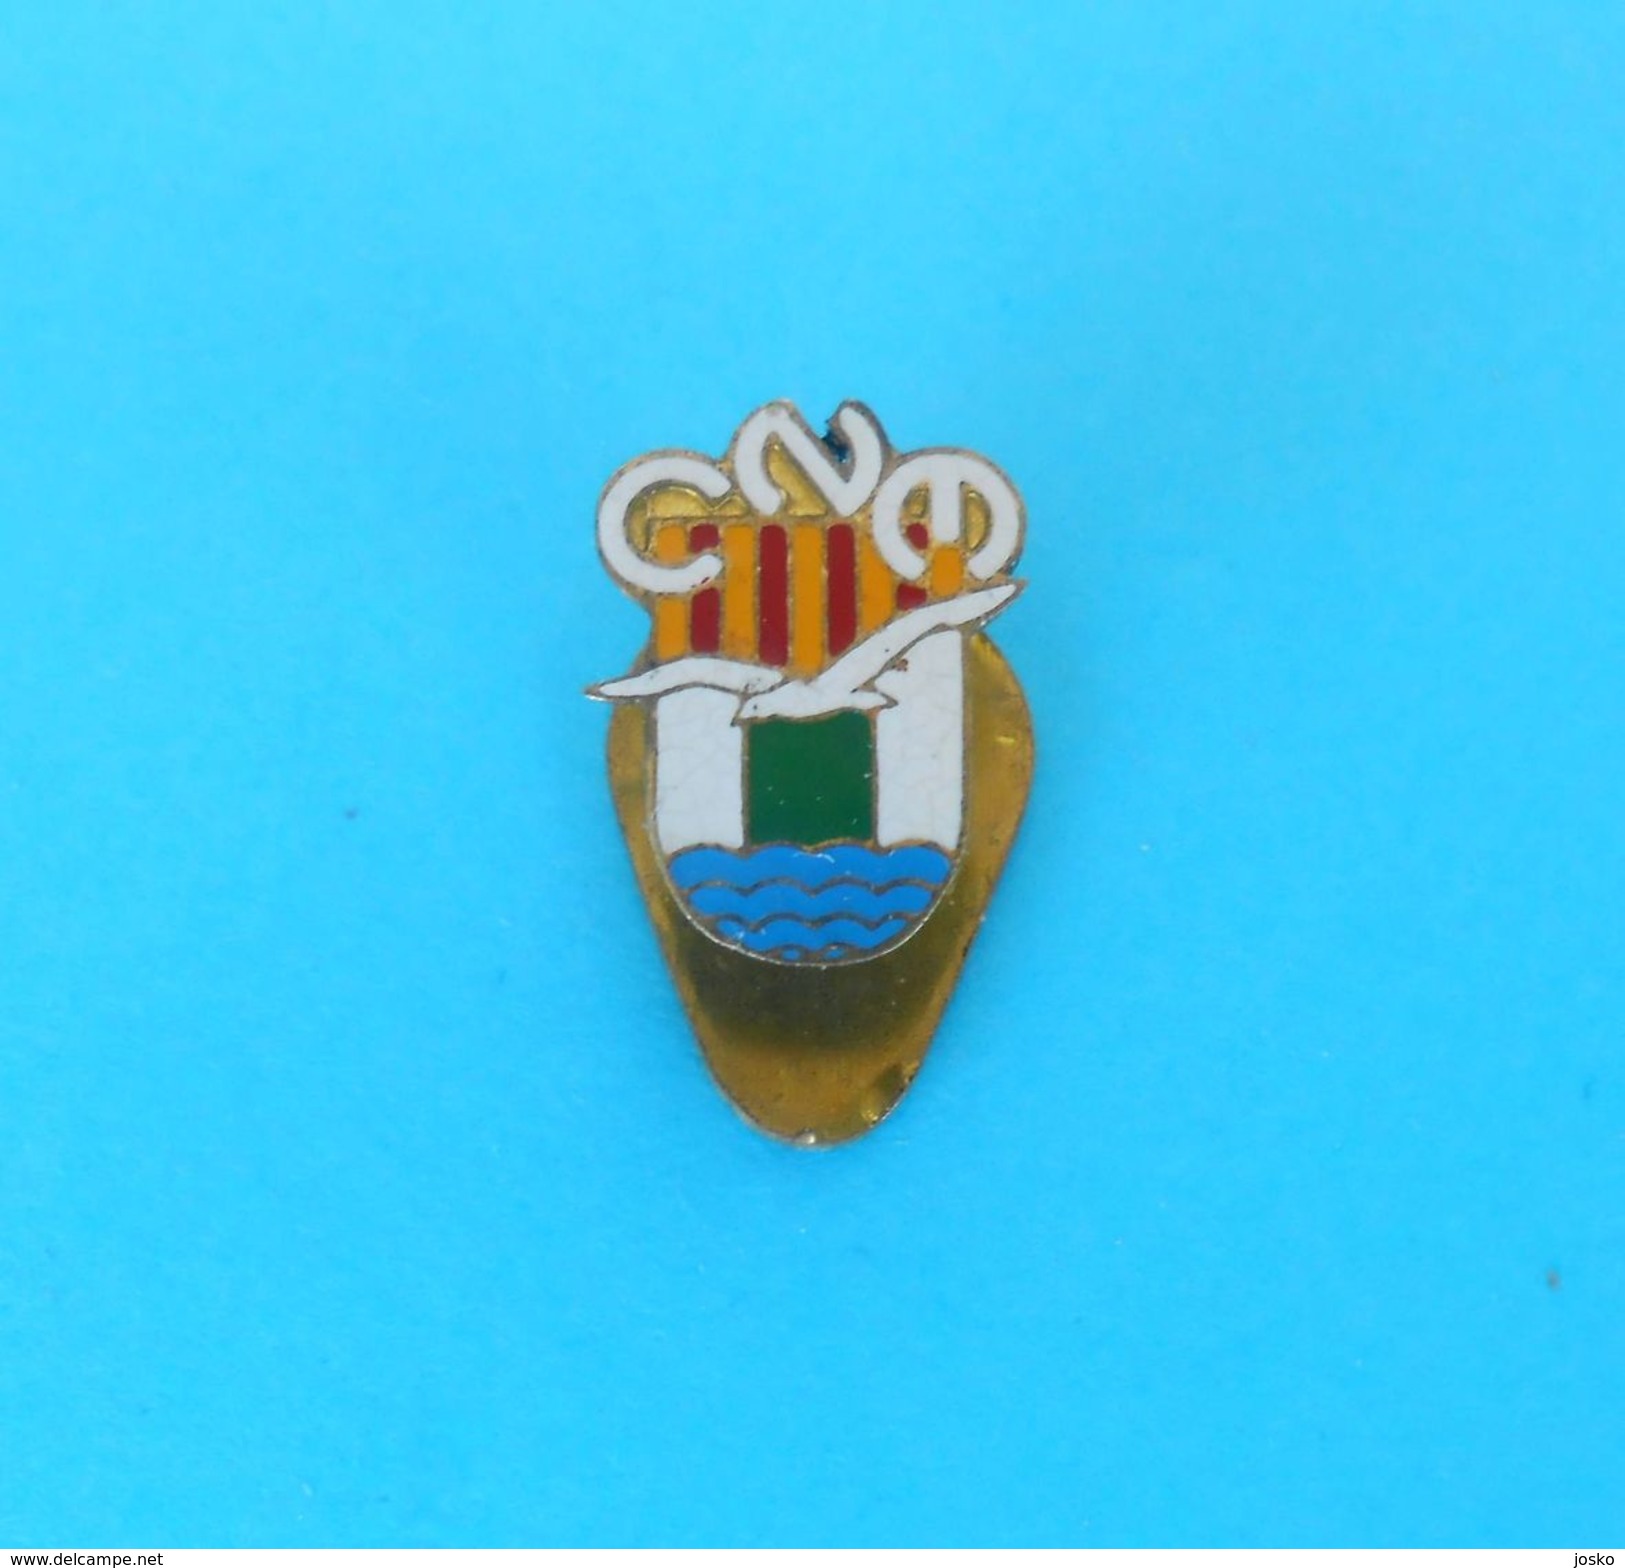 SPAIN SWIMMING FEDERATION - Old Buttonhole Pin Badge Natation Natacion Schwimmen Nuoto Water-polo Waterpolo Anstecknadel - Swimming